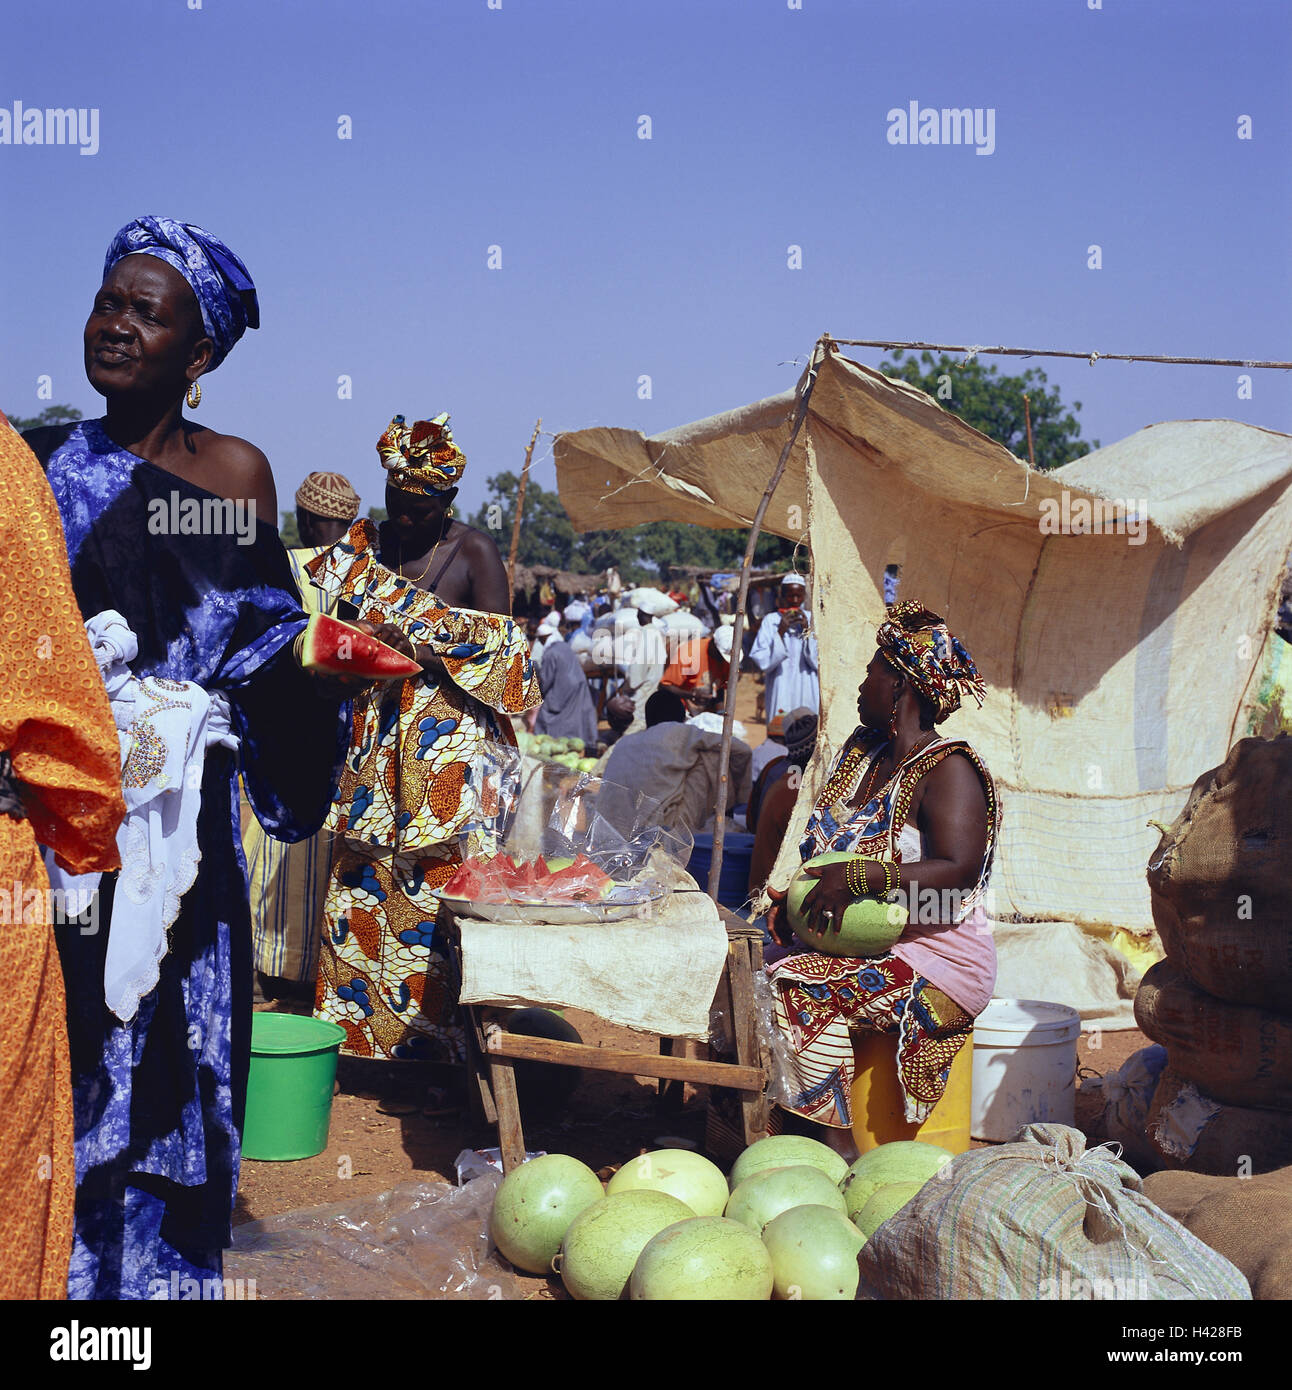 Senegal, Kaolack, market scene, Africa, West Africa, economy, market, market beating out, market stalls, sales booths, women, people, Senegaleses, swarthy, clothes, traditionally, headscarfs, dealer, customers, fruits, fruit, watermelons, melons, trade, s Stock Photo